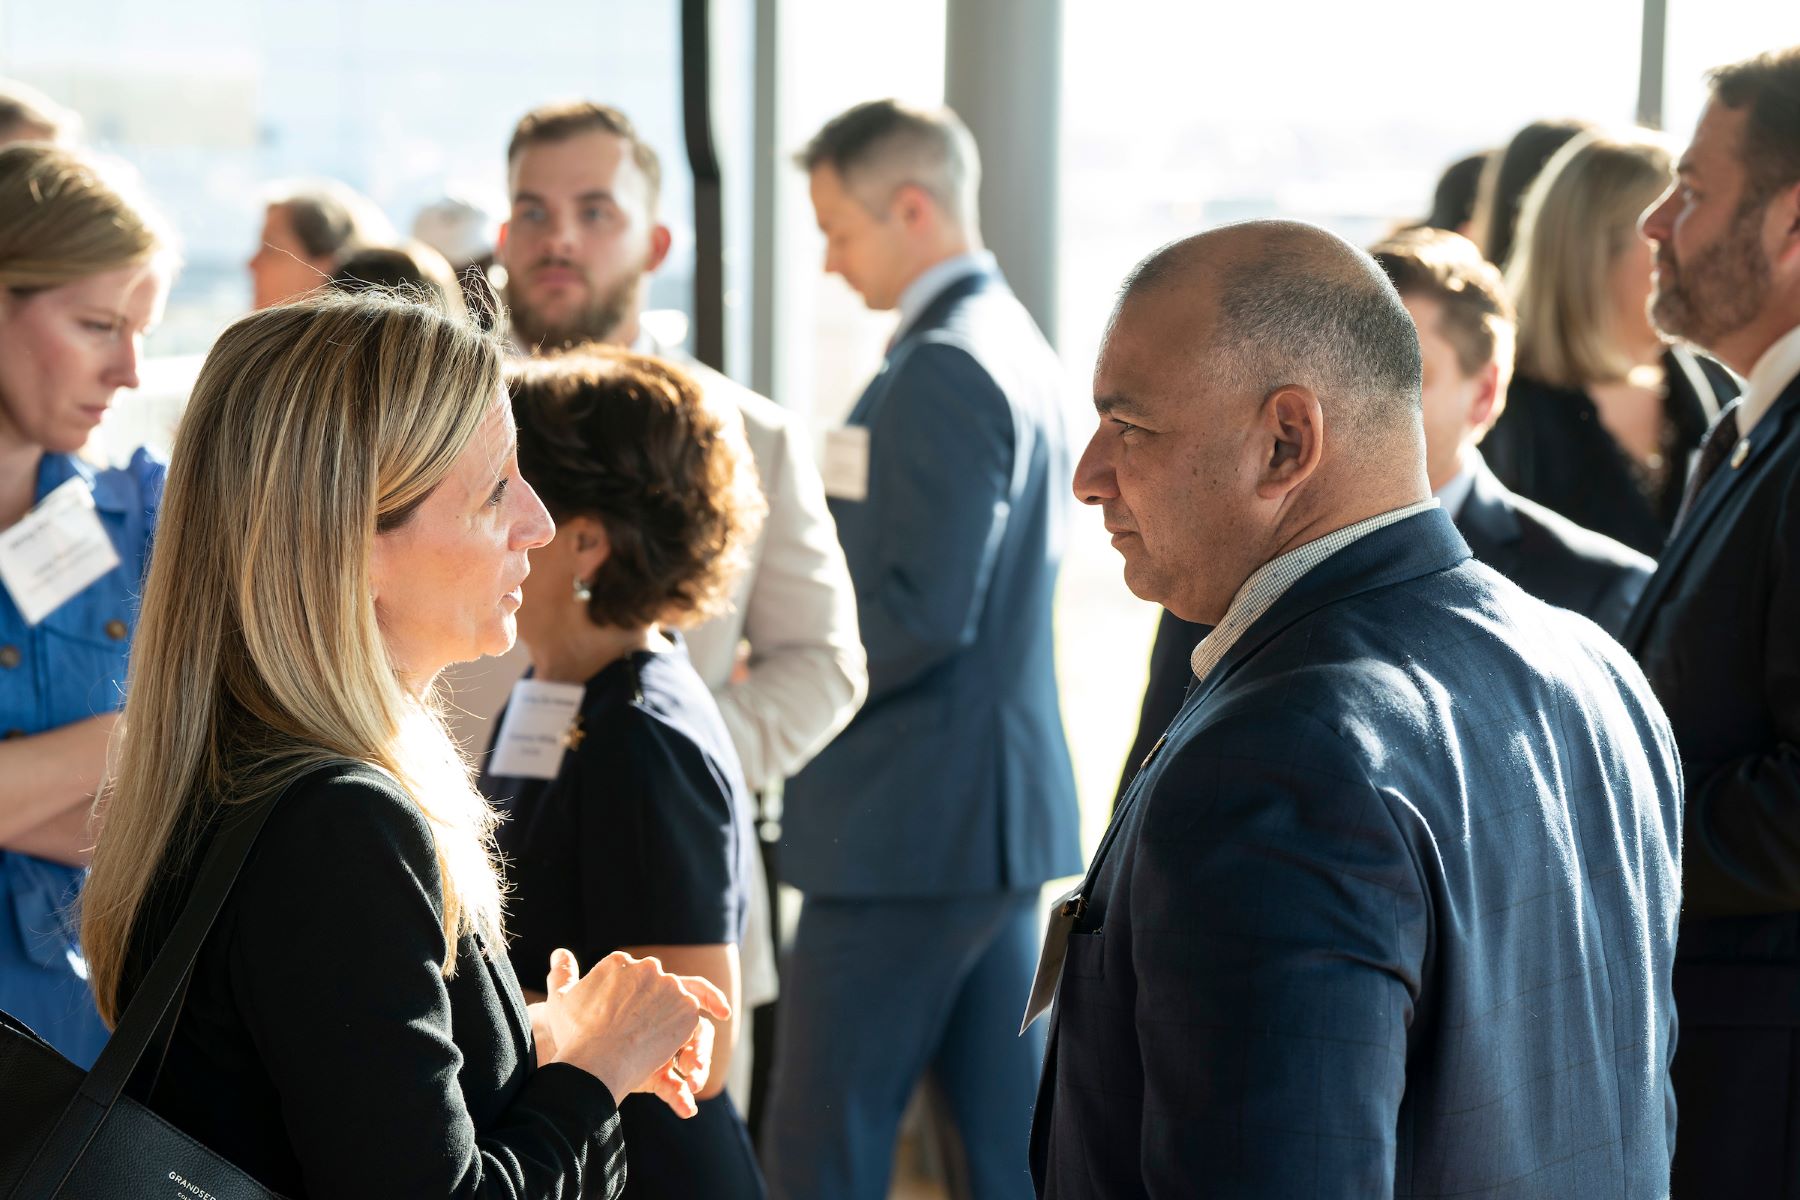 Business leaders talking at a networking reception